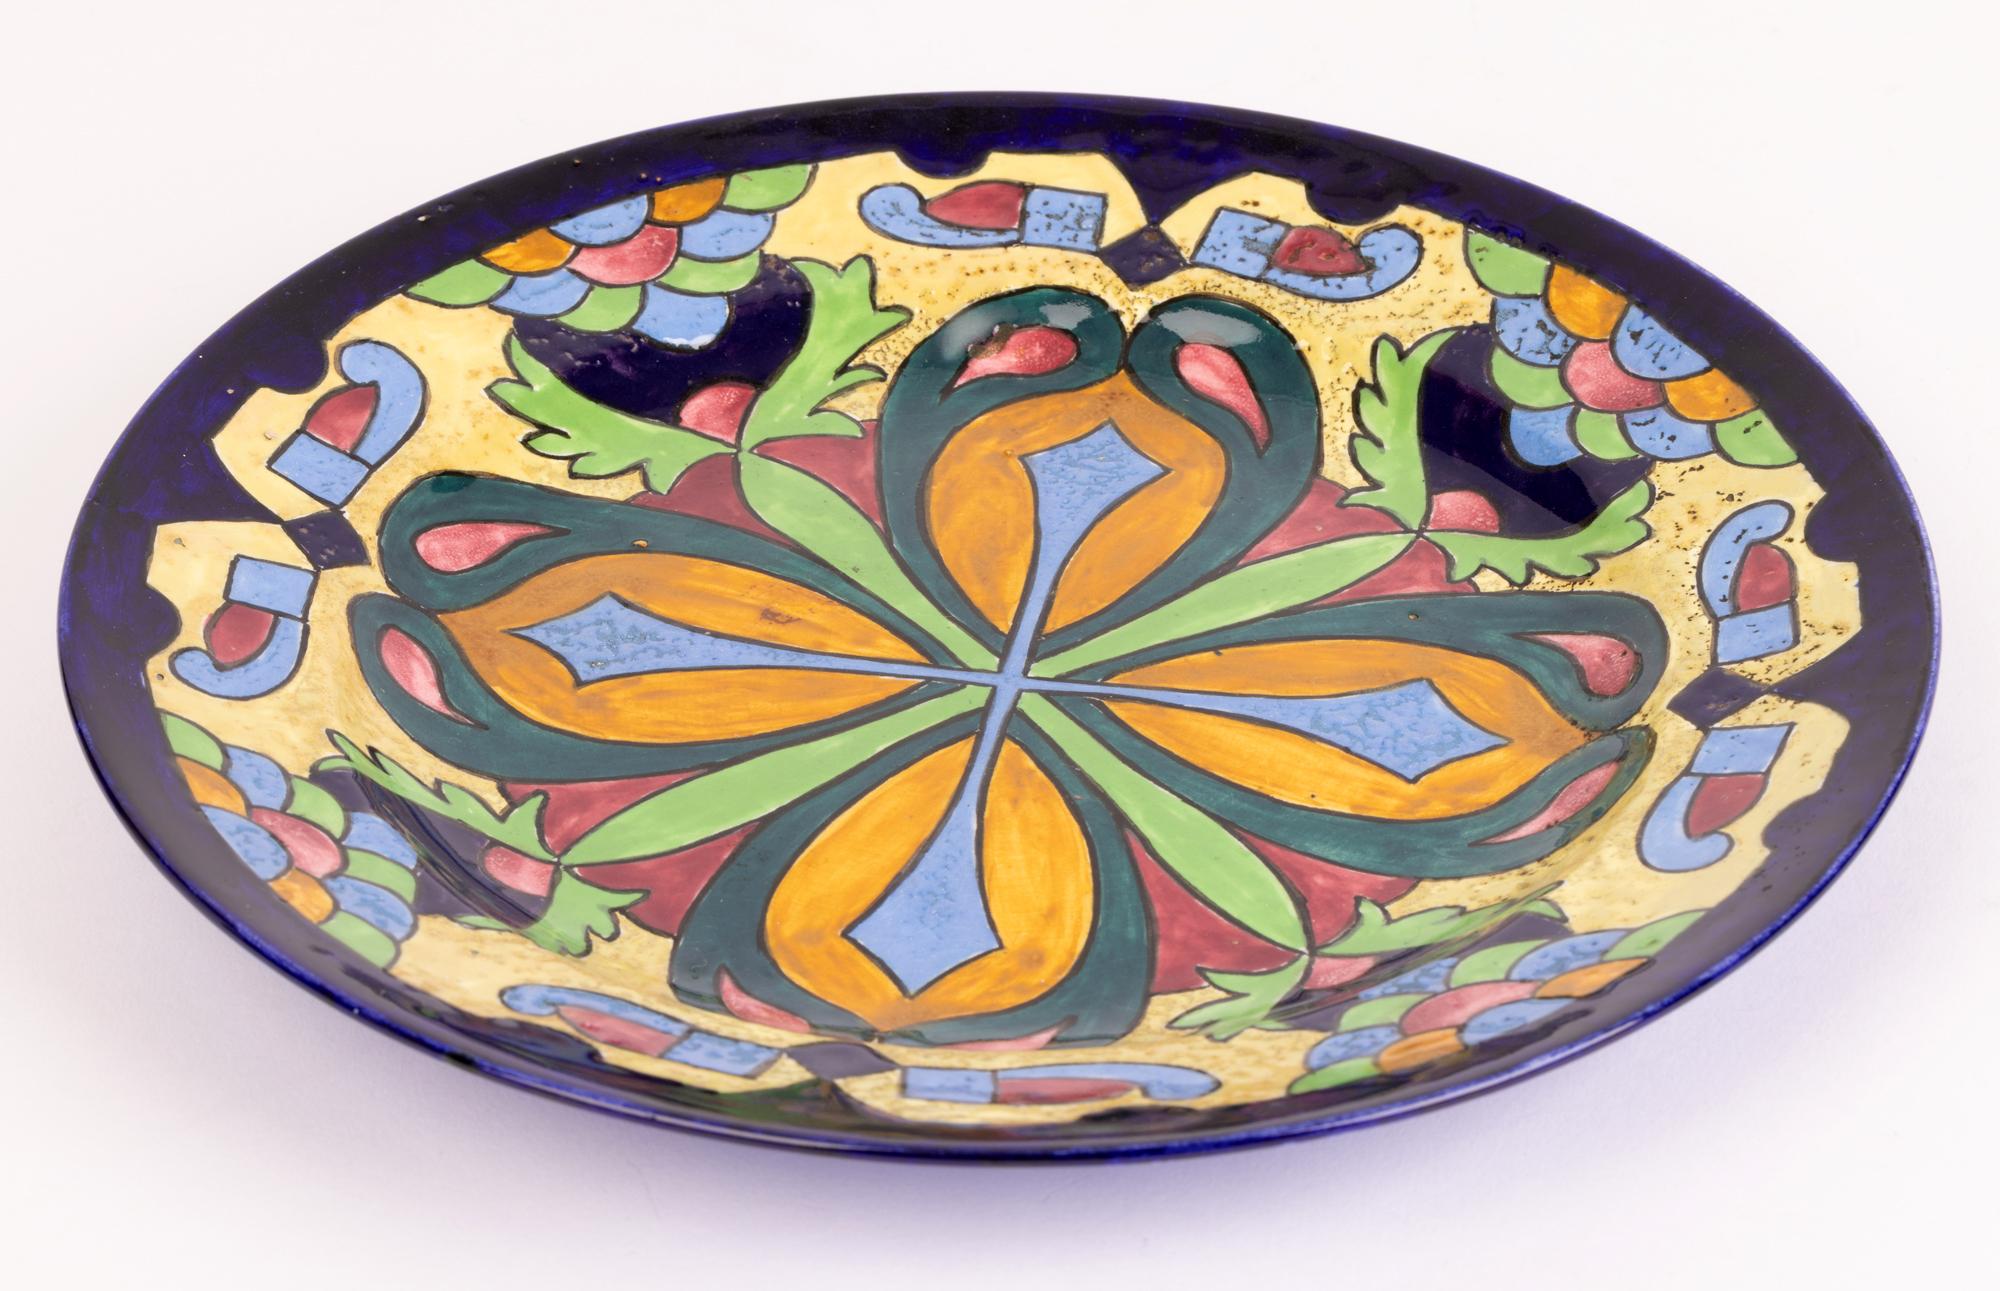 An unusual and unique English Art Deco hand painted pottery plate with an abstract leaf design attributed to renowned English ceramics designer Charlotte Rhead (English, 1885-1947) dated 1925. The plate we believe is a George Jones blank which may